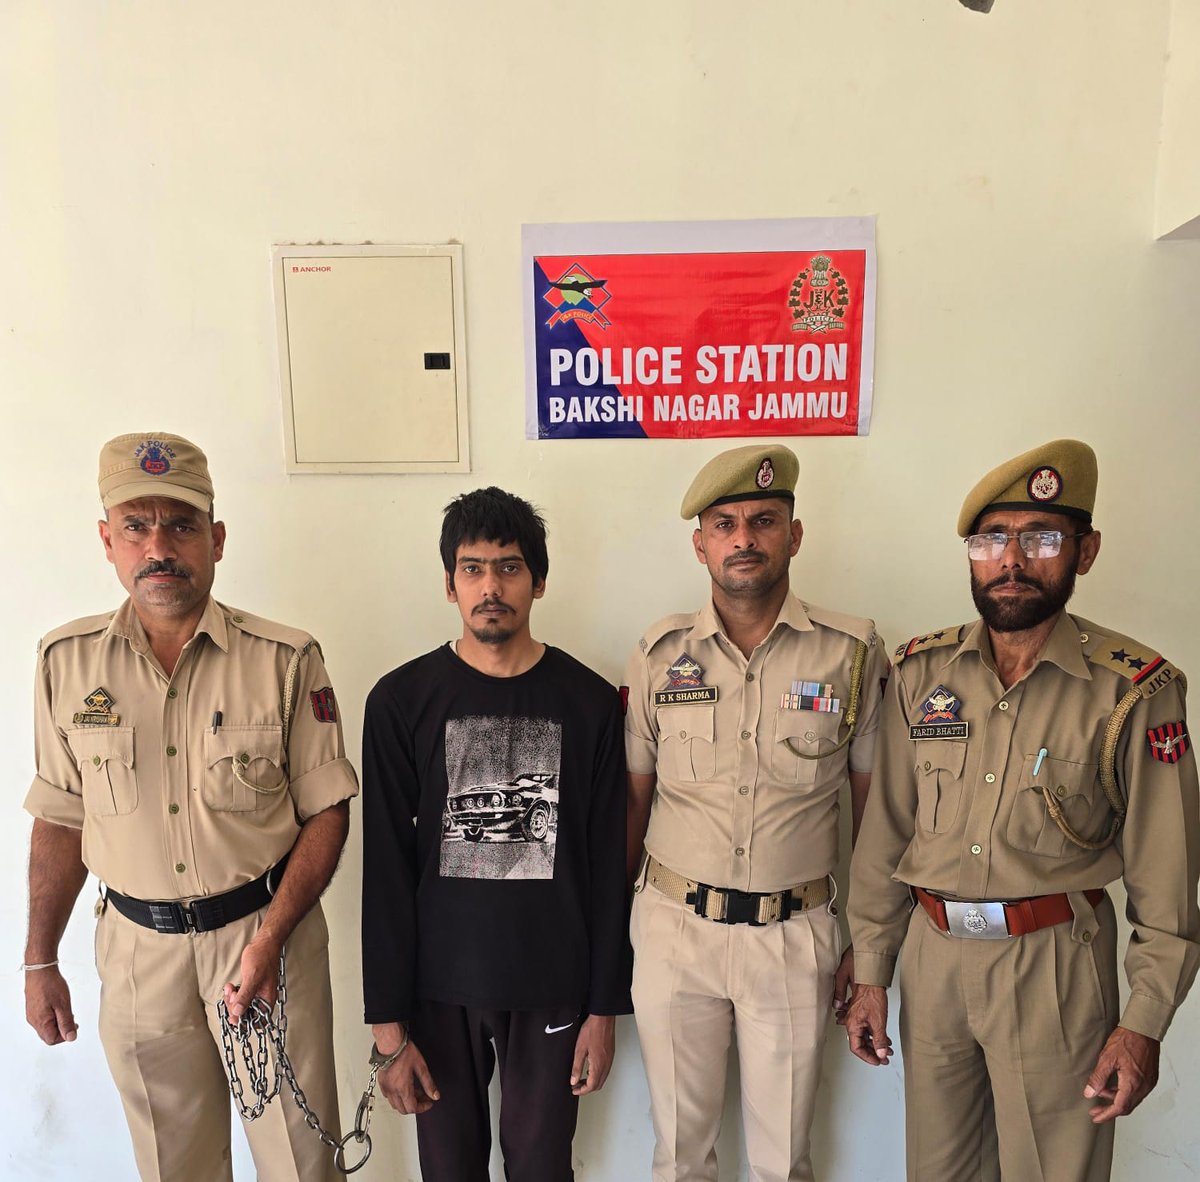 Jammu & Kashmir Police crack a 5-year-old blind murder case, solving the 2019 murder of priest Baba Pragat Nath Ji. Main culprit Ashish Kumar, part of a multi-state gang, apprehended in Haryana. Justice prevails! #JusticeServed #CommitmentToSafety